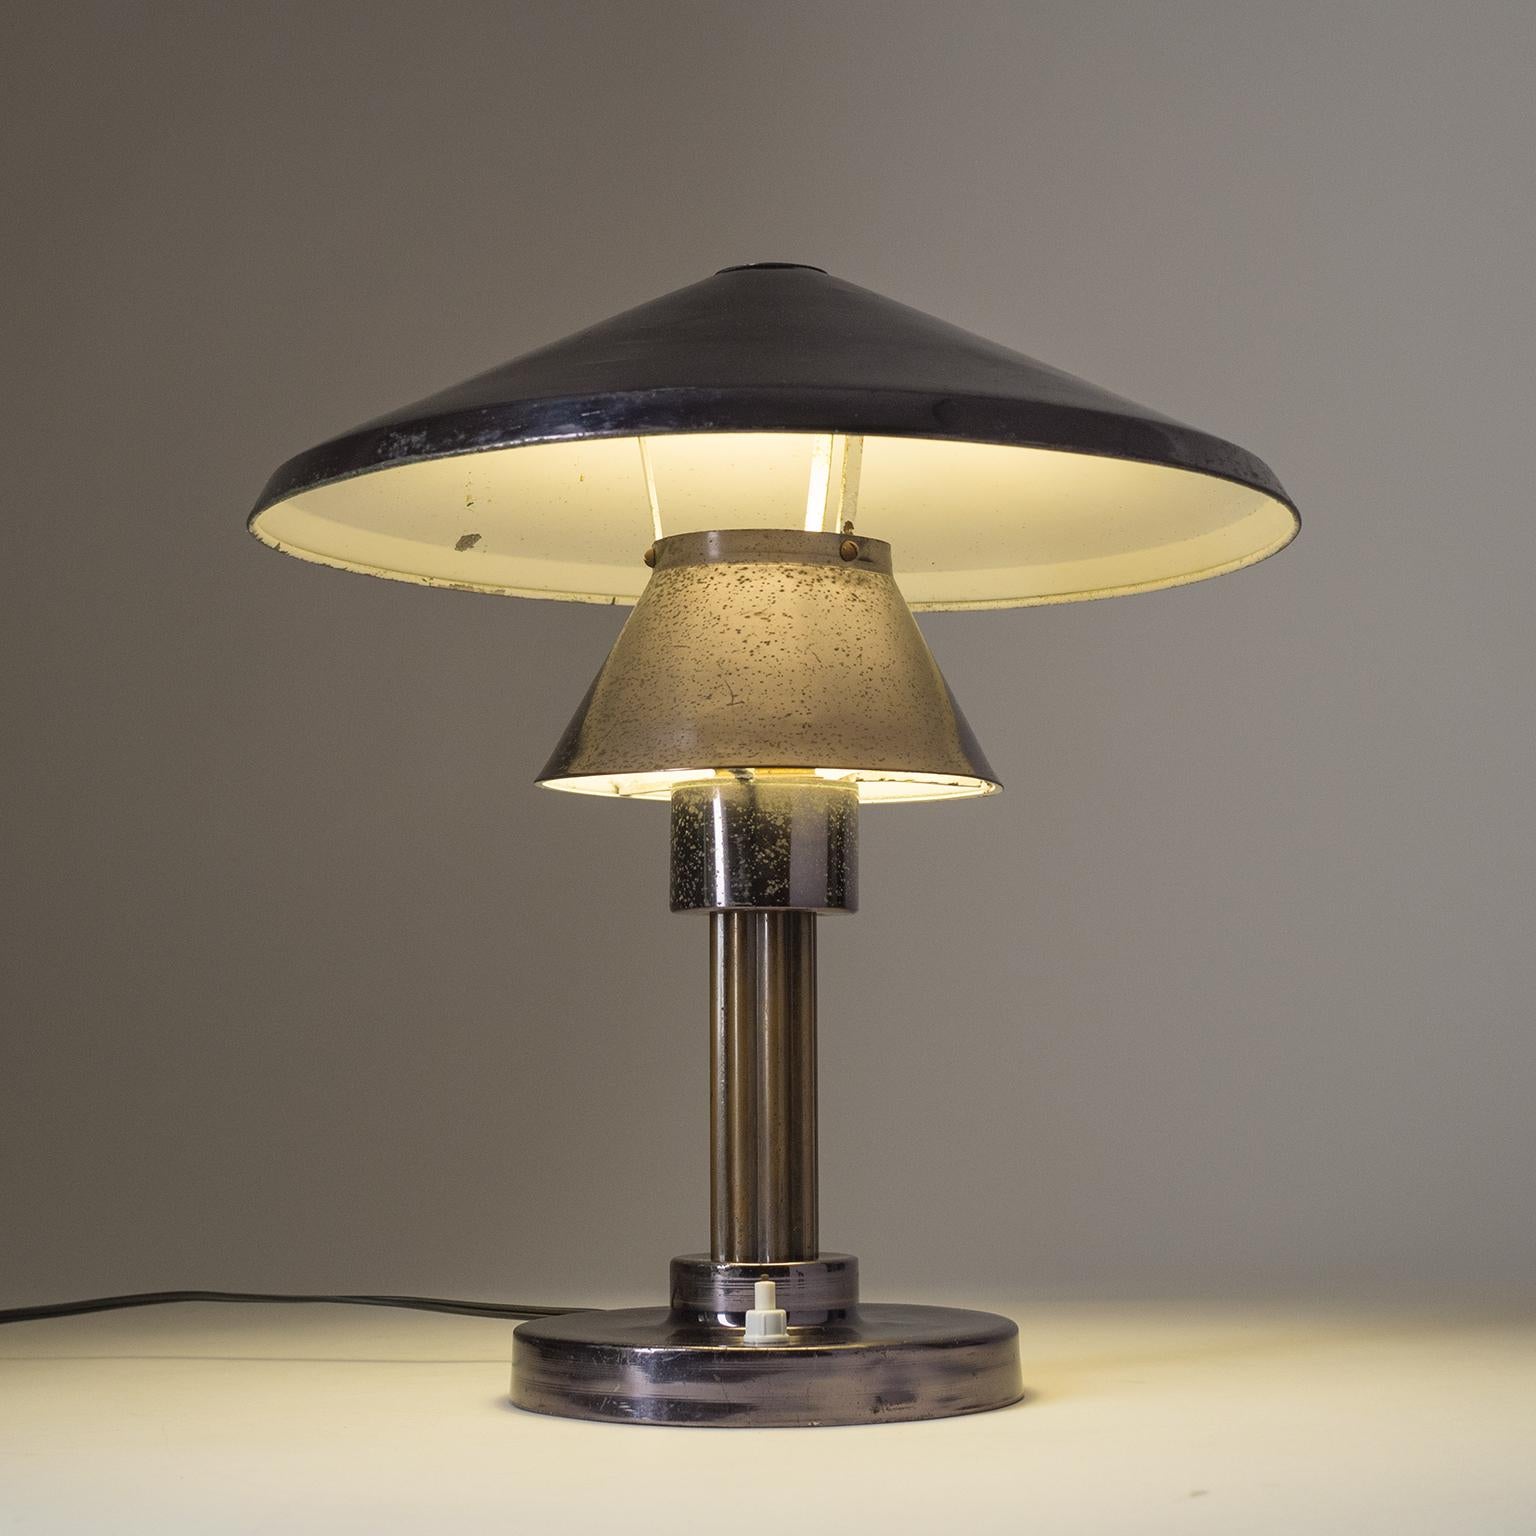 Italian Desk Lamp, 1950s, Patinated Nickel For Sale 7